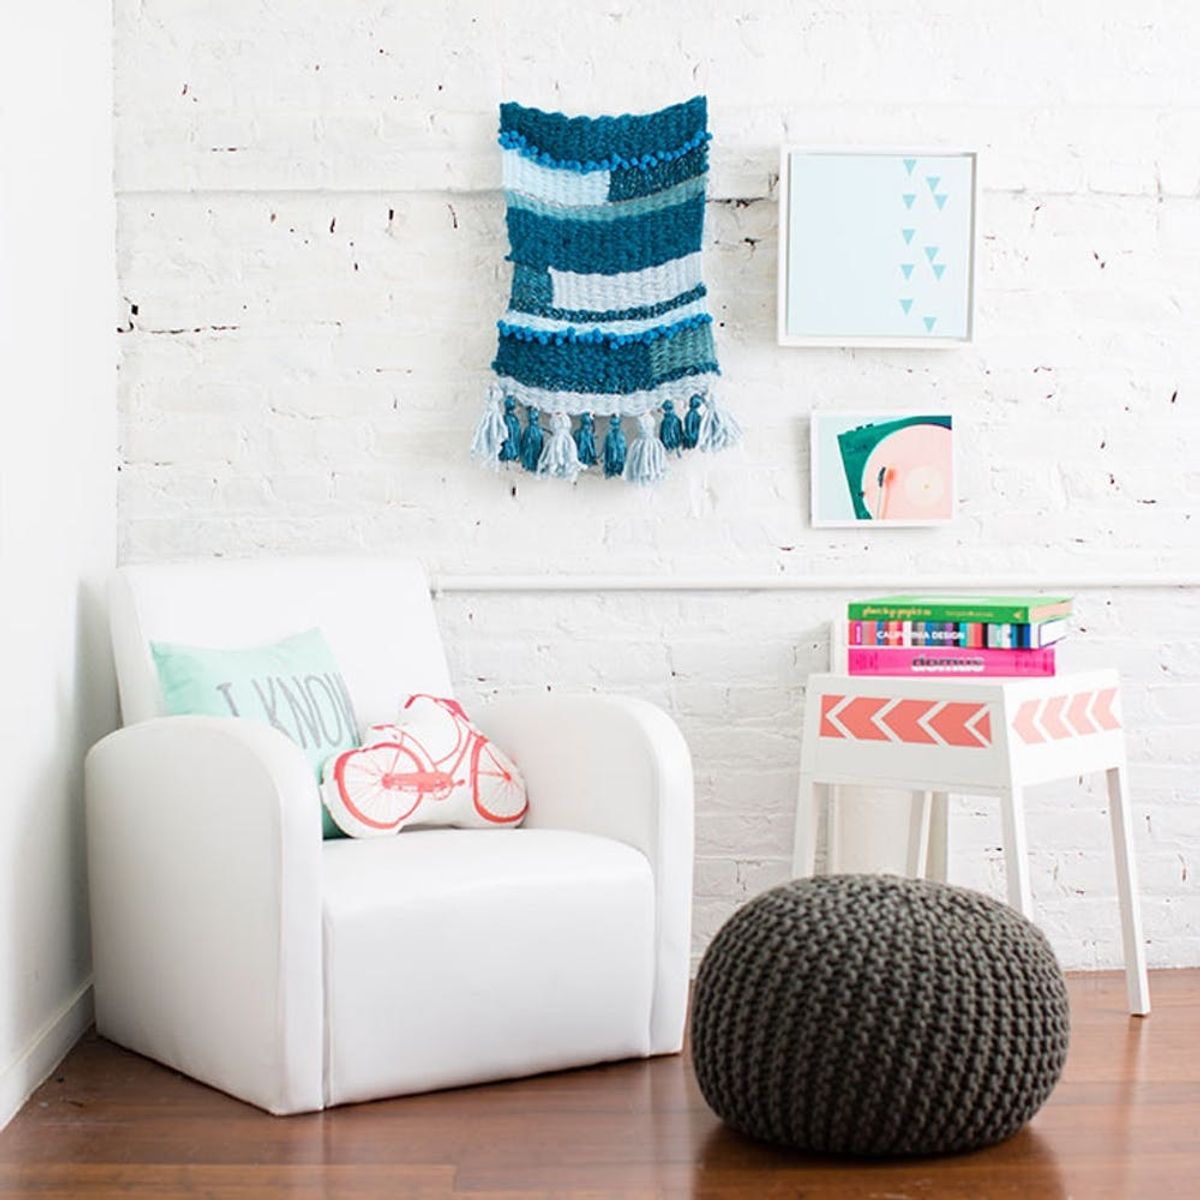 17 Reasons You Should Be Decorating With Ropes